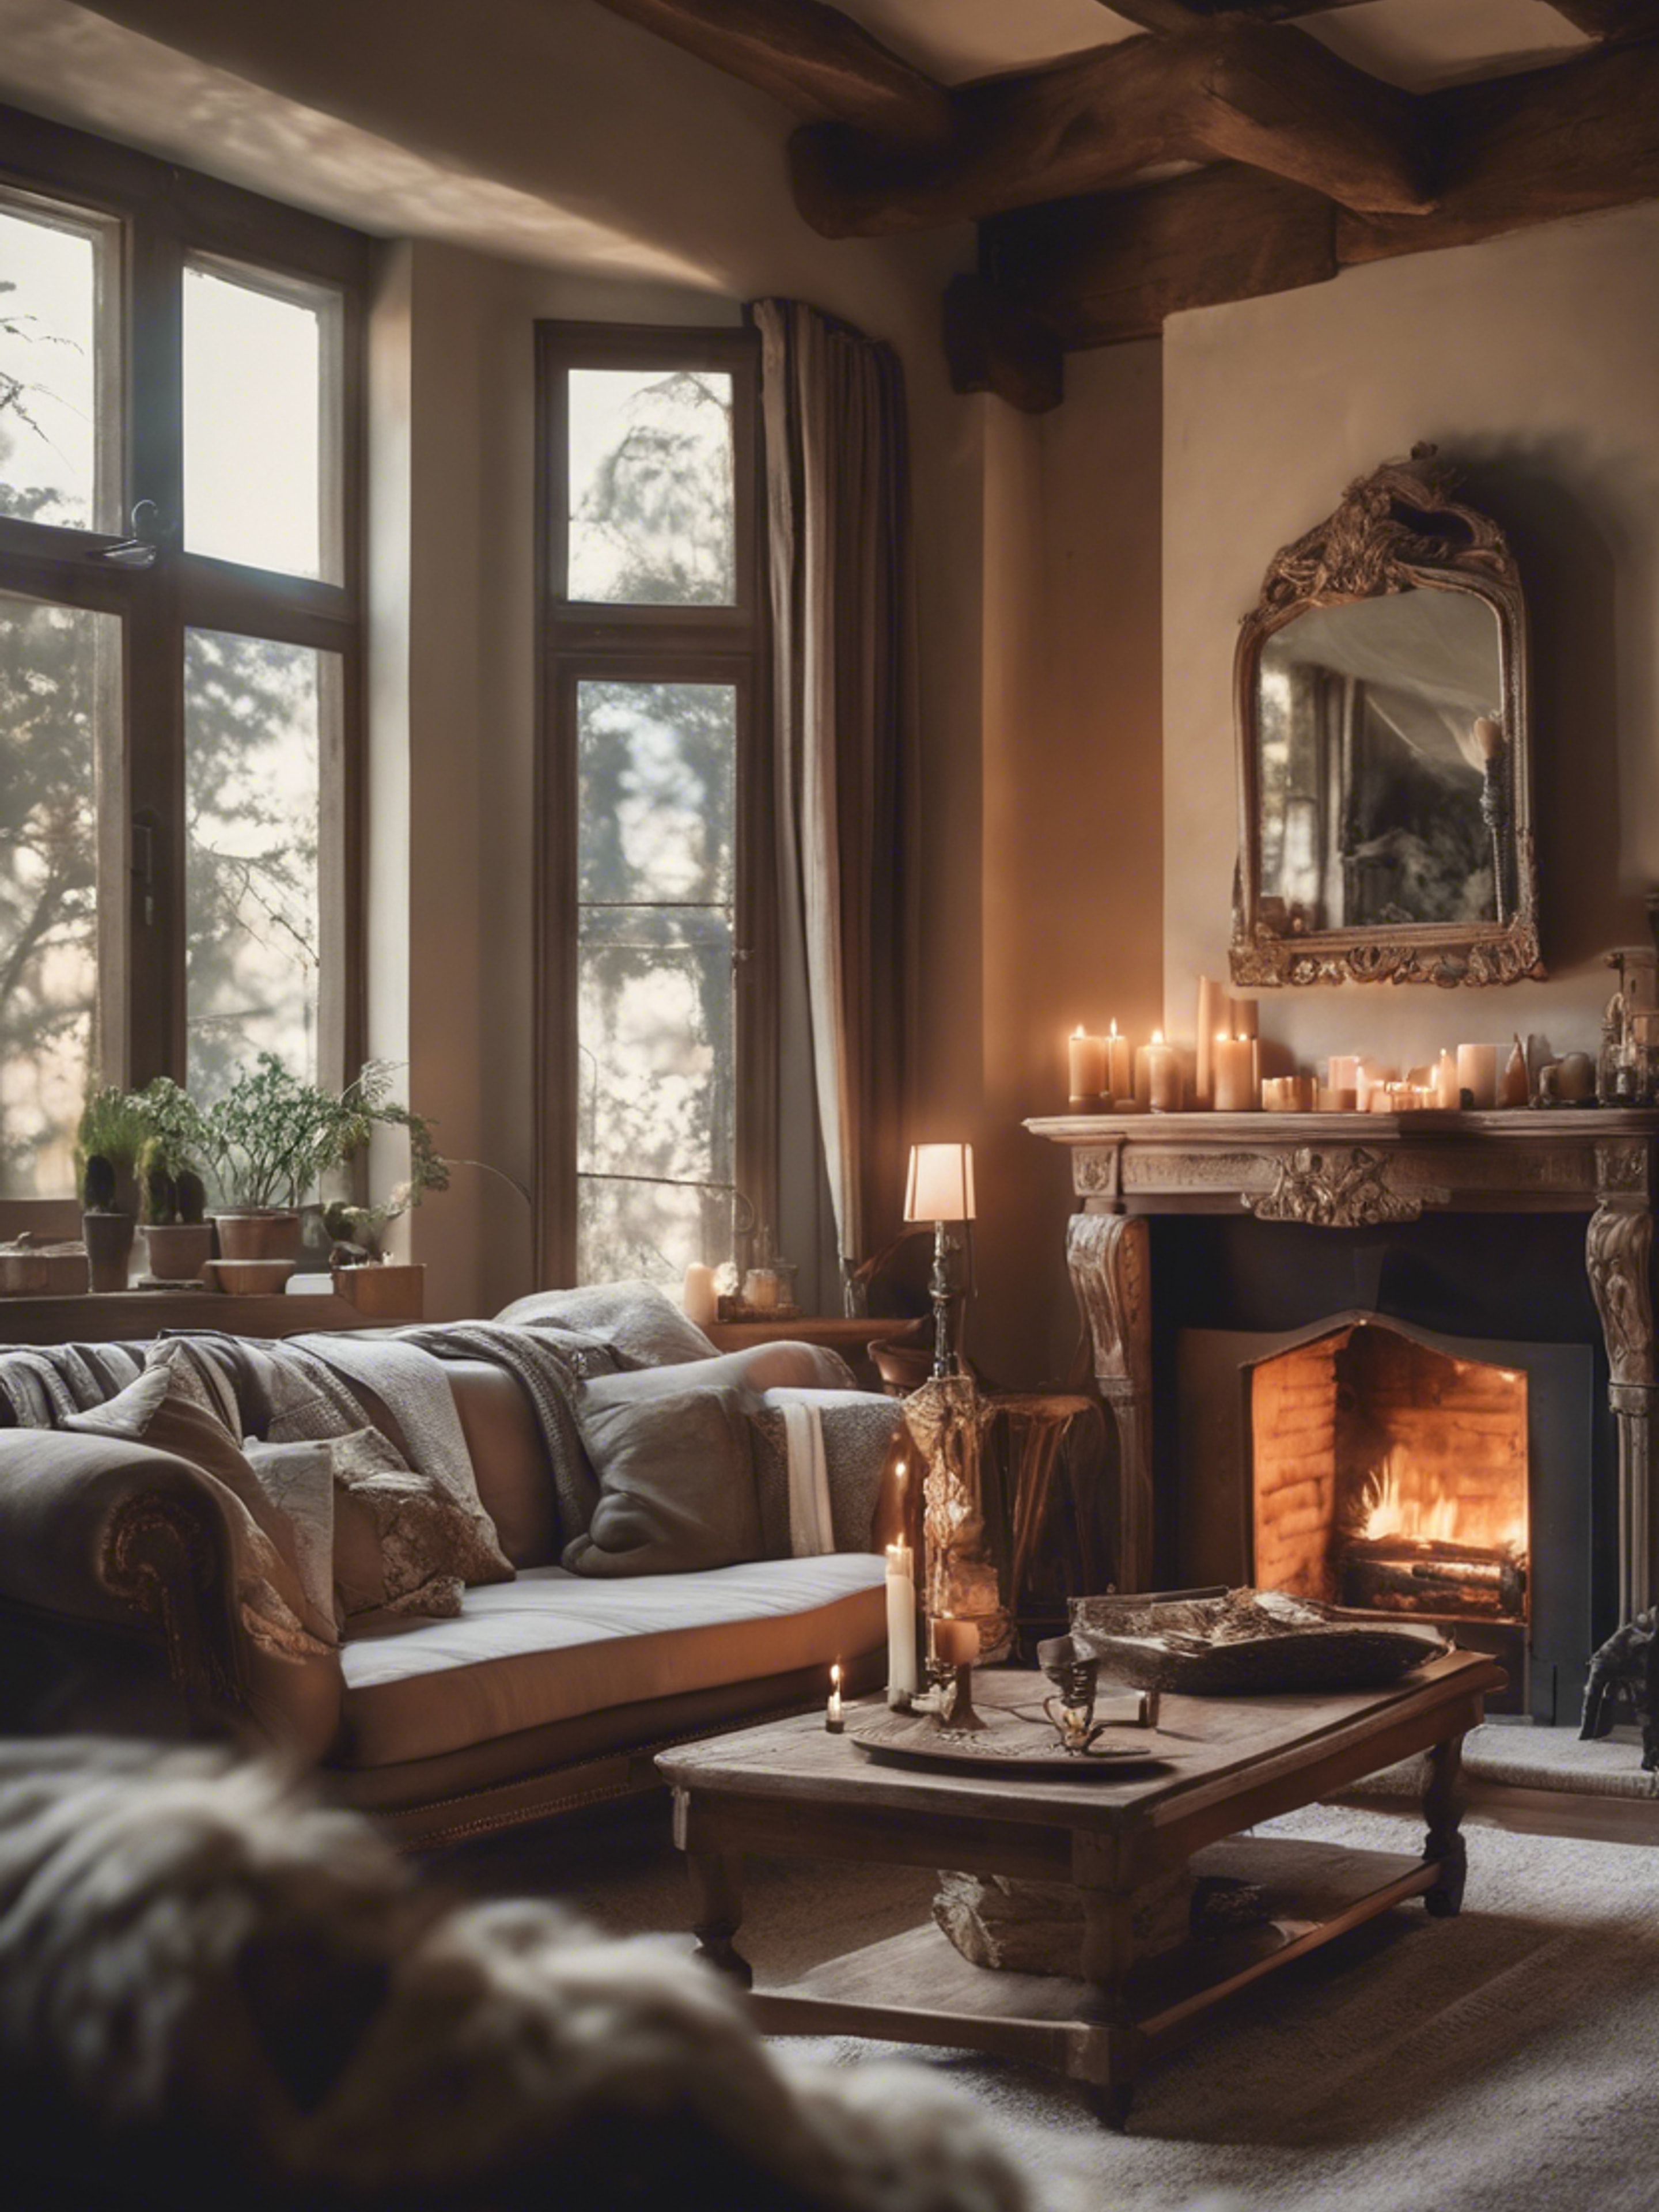 A French country style living room, cozy and comfortable with a roaring fireplace, antique furniture, and soft candlelight. ផ្ទាំង​រូបភាព[b1f658778f85425ba676]